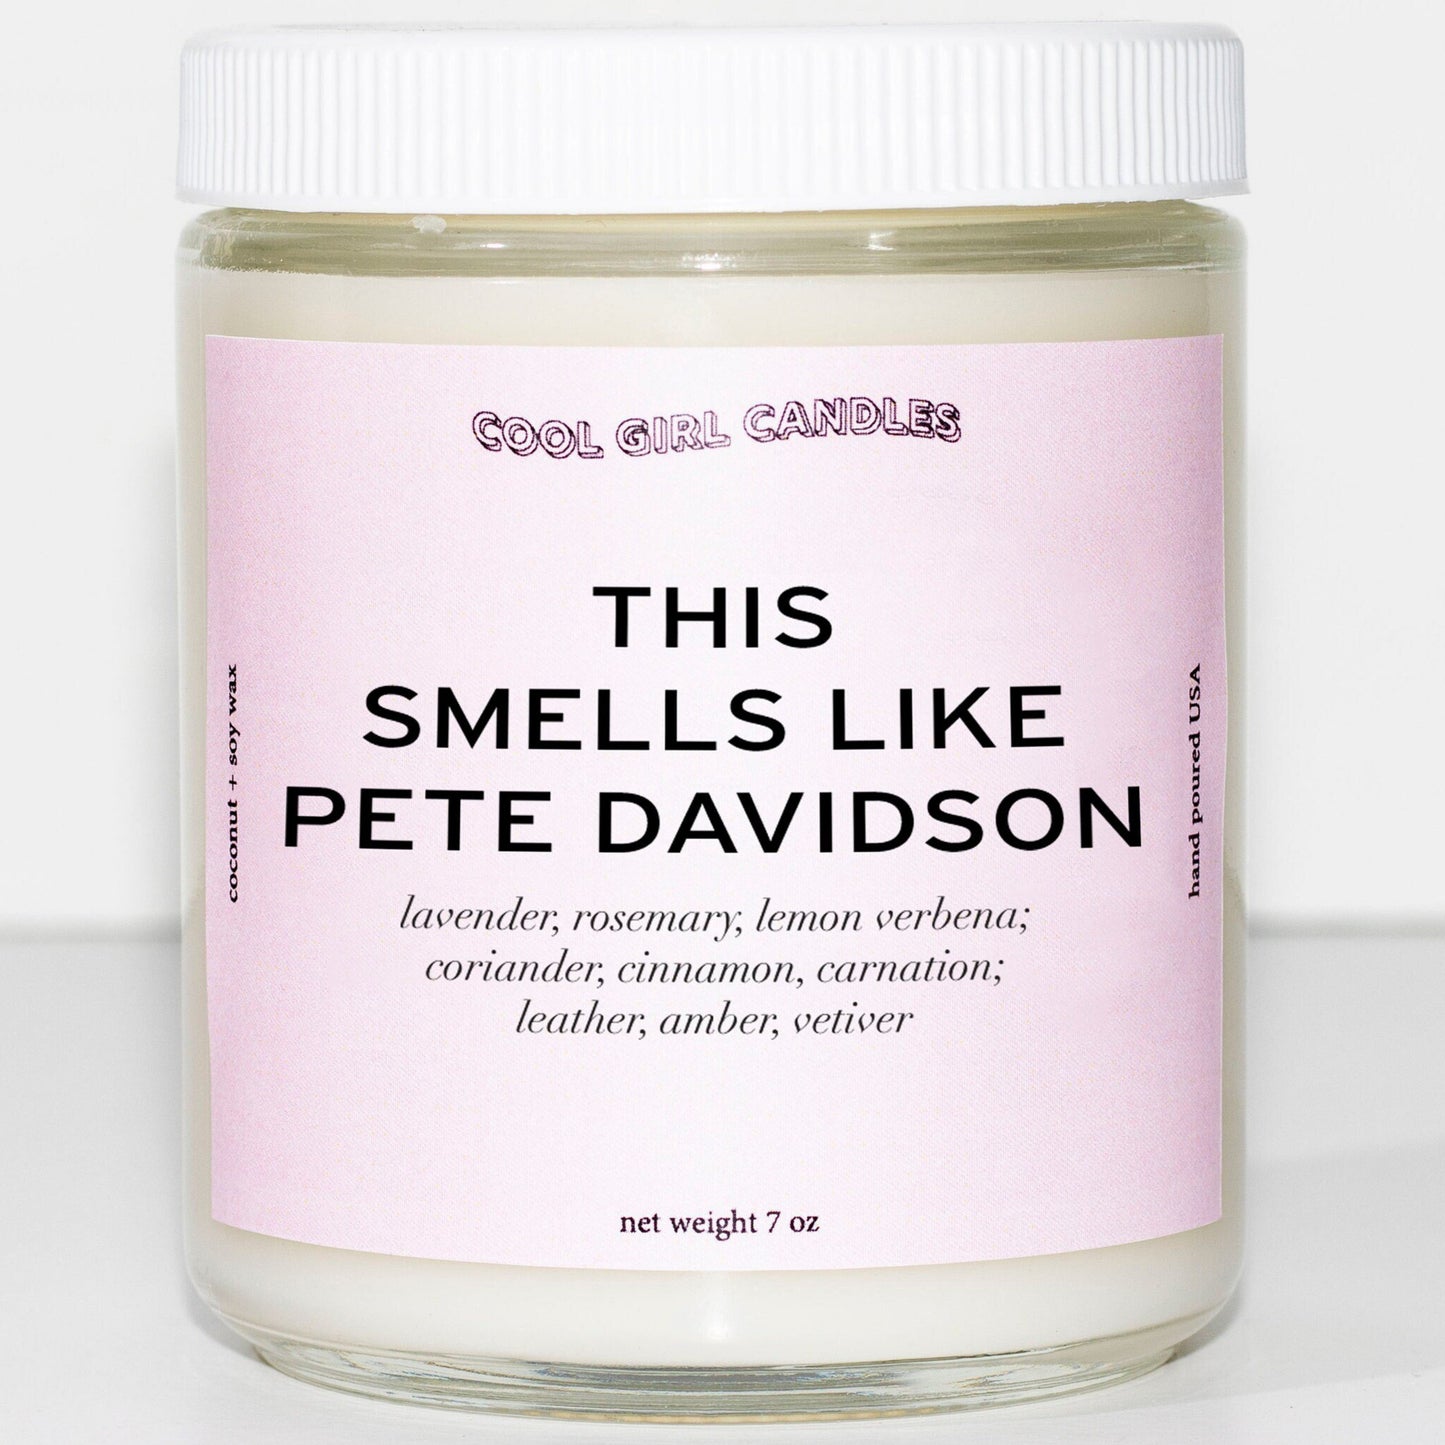 this smells like pete davidson candle cool girl candles celebrity candle candles that smell like celebrities pete davidson merch machine gun kelly candle MGK candle